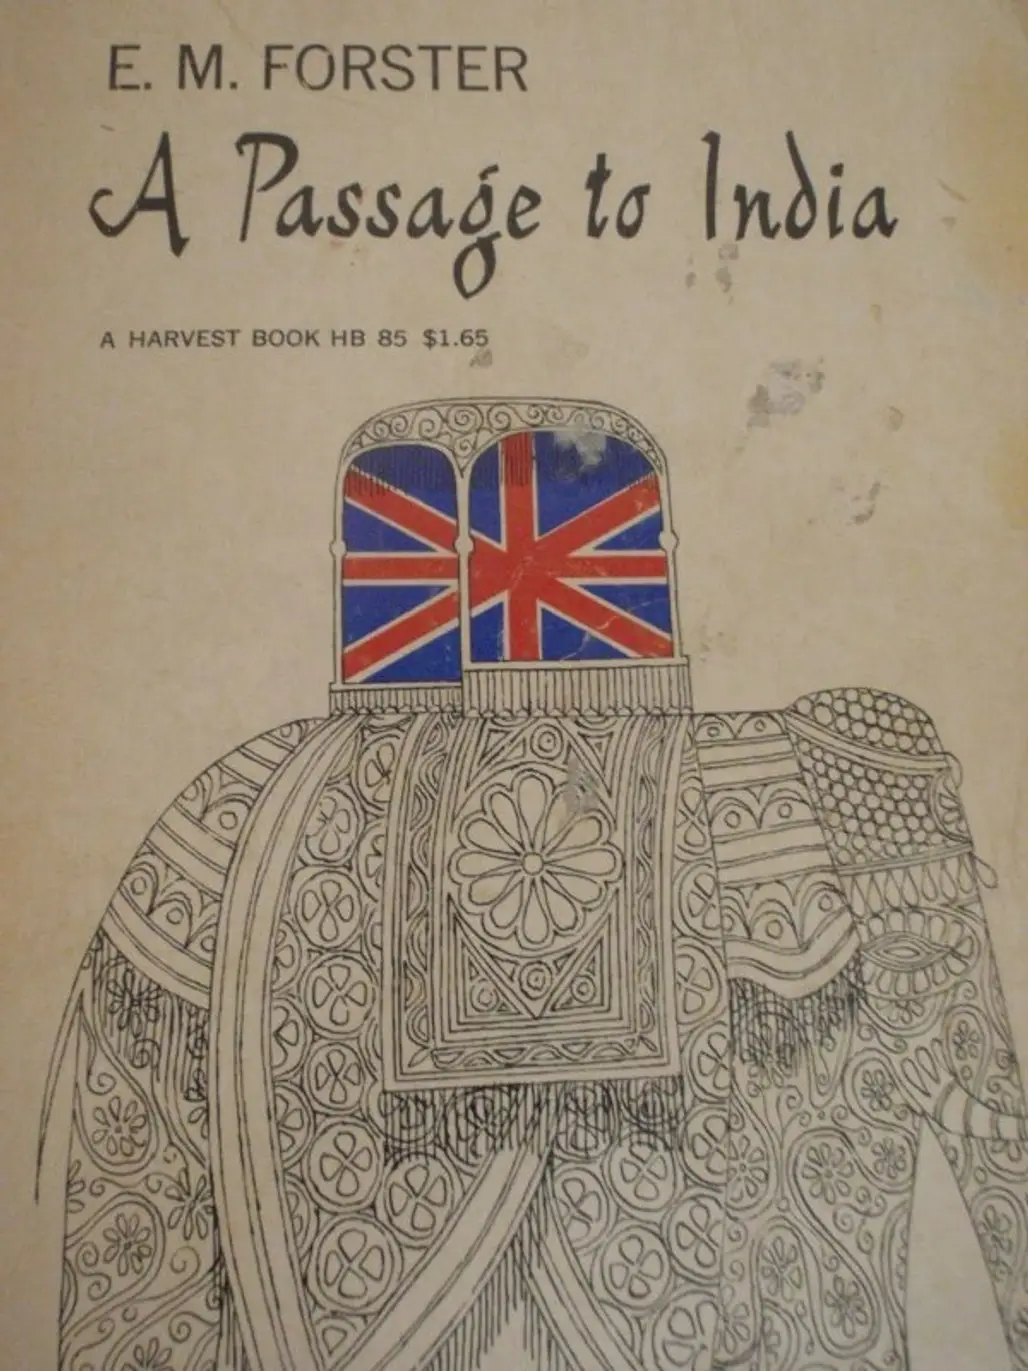 A Passage to India, by E. M. Forster